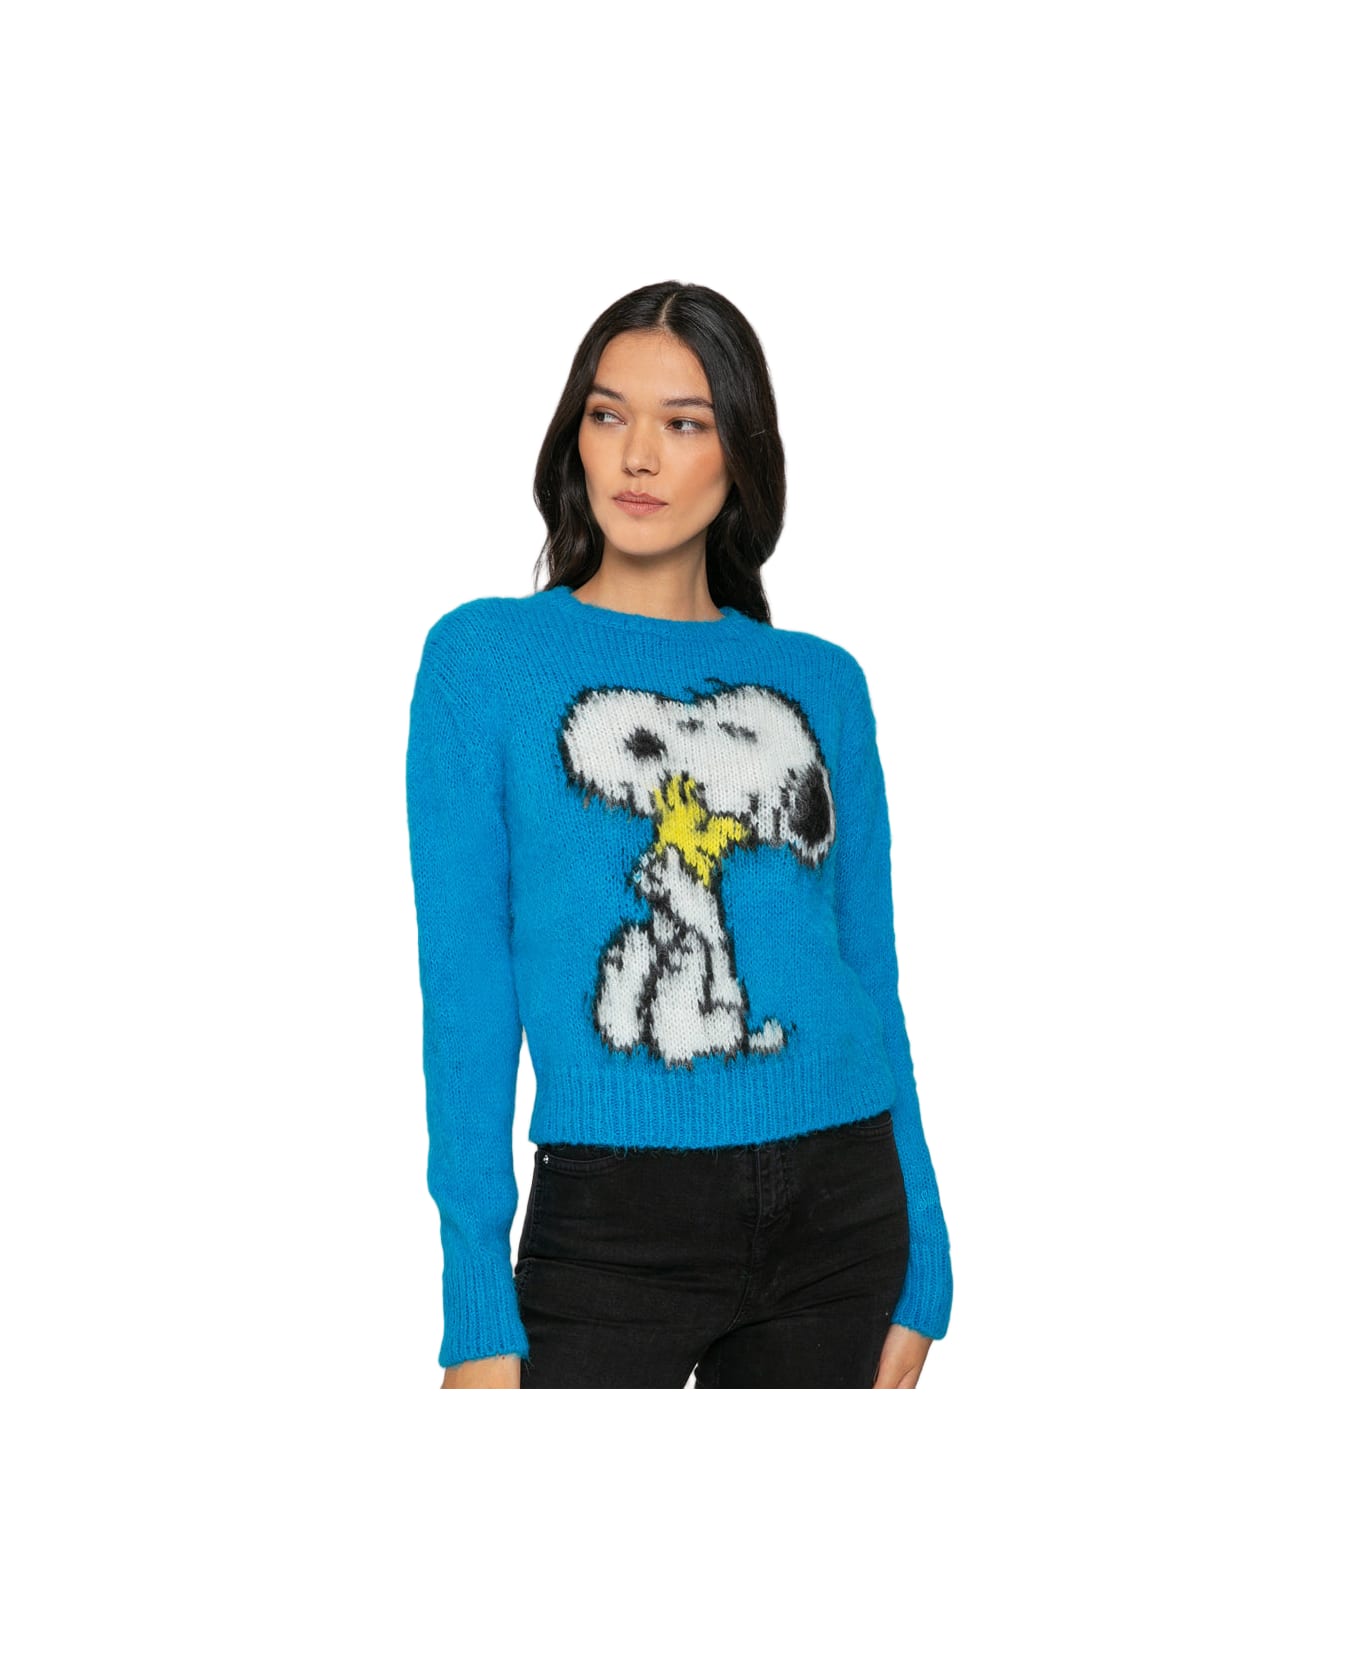 MC2 Saint Barth Woman Brushed Sweater With Snoopy Print | Snoopy - Peanuts Special Edition - BLUE ニットウェア